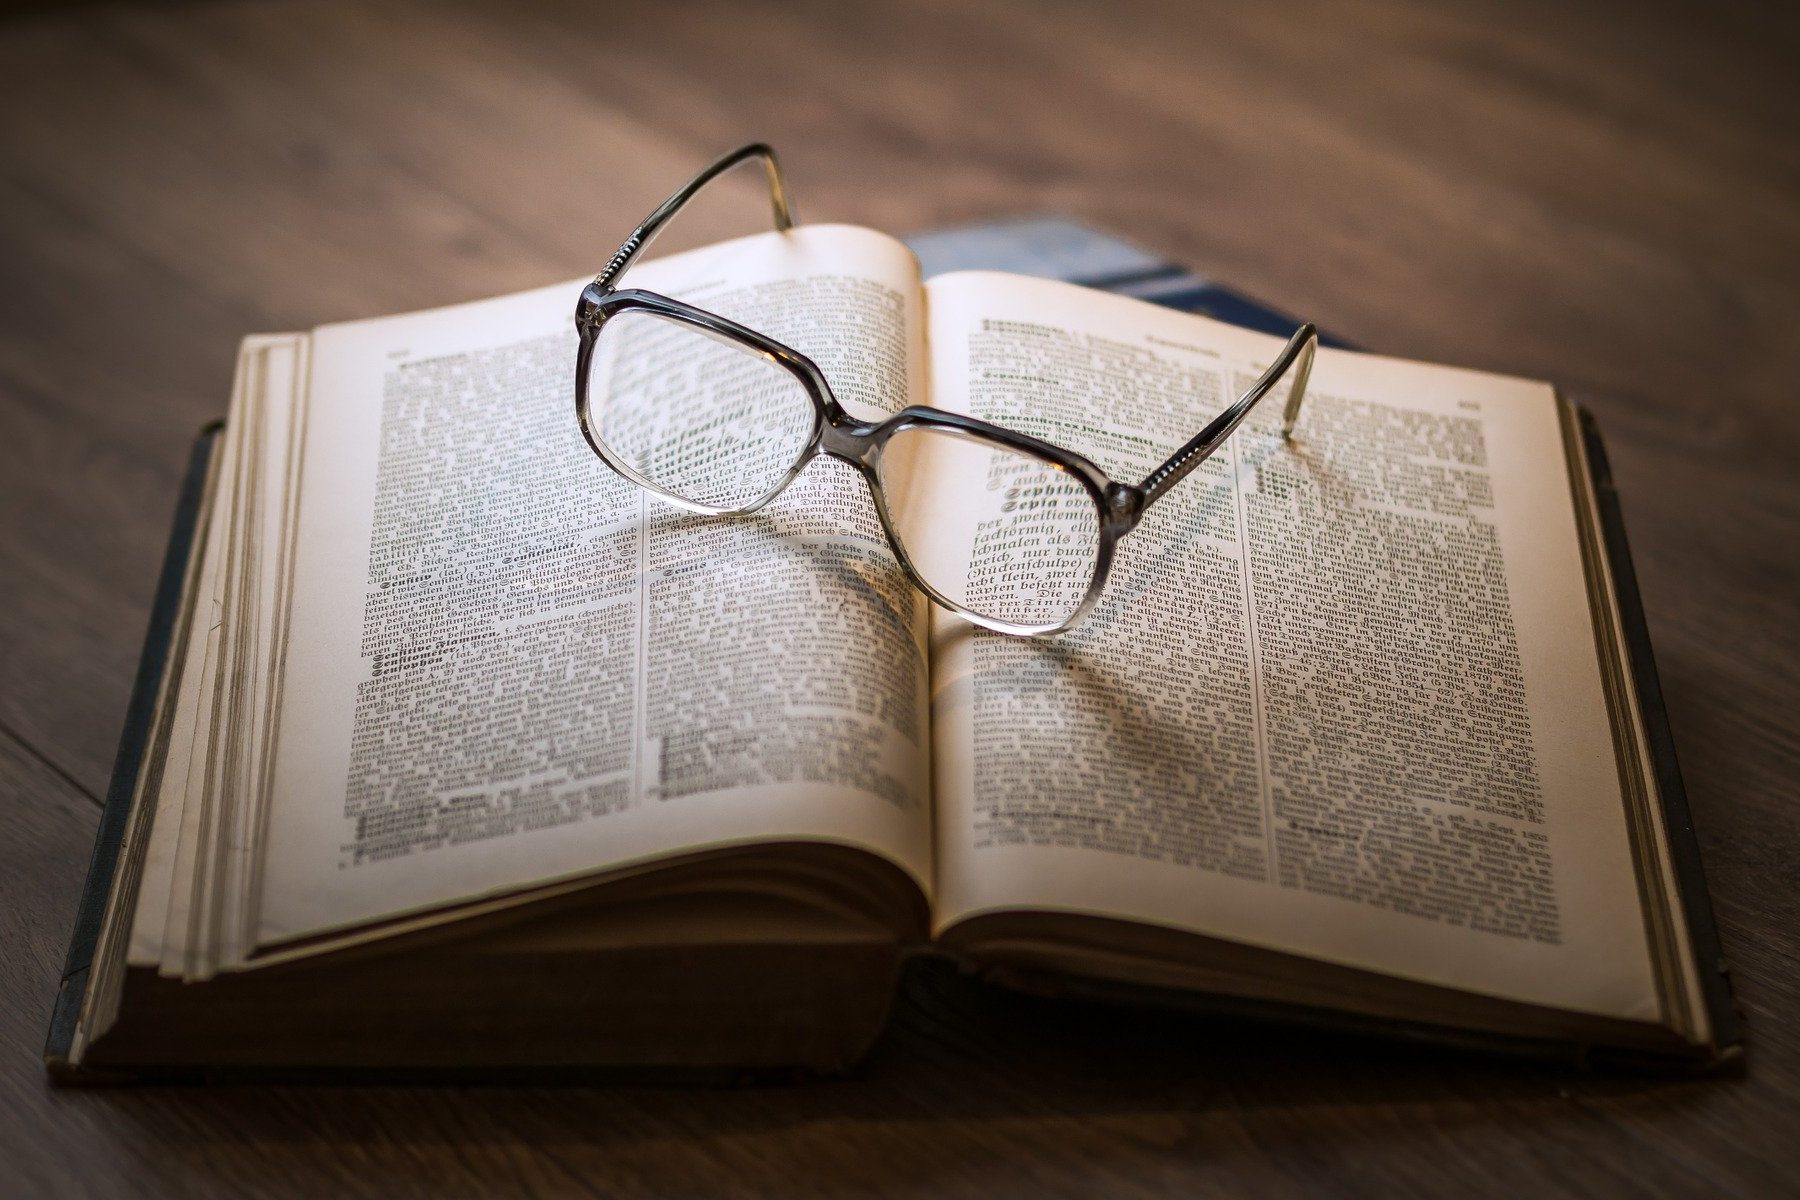 In an article about Warby Parker, an image of glasses on top of a book